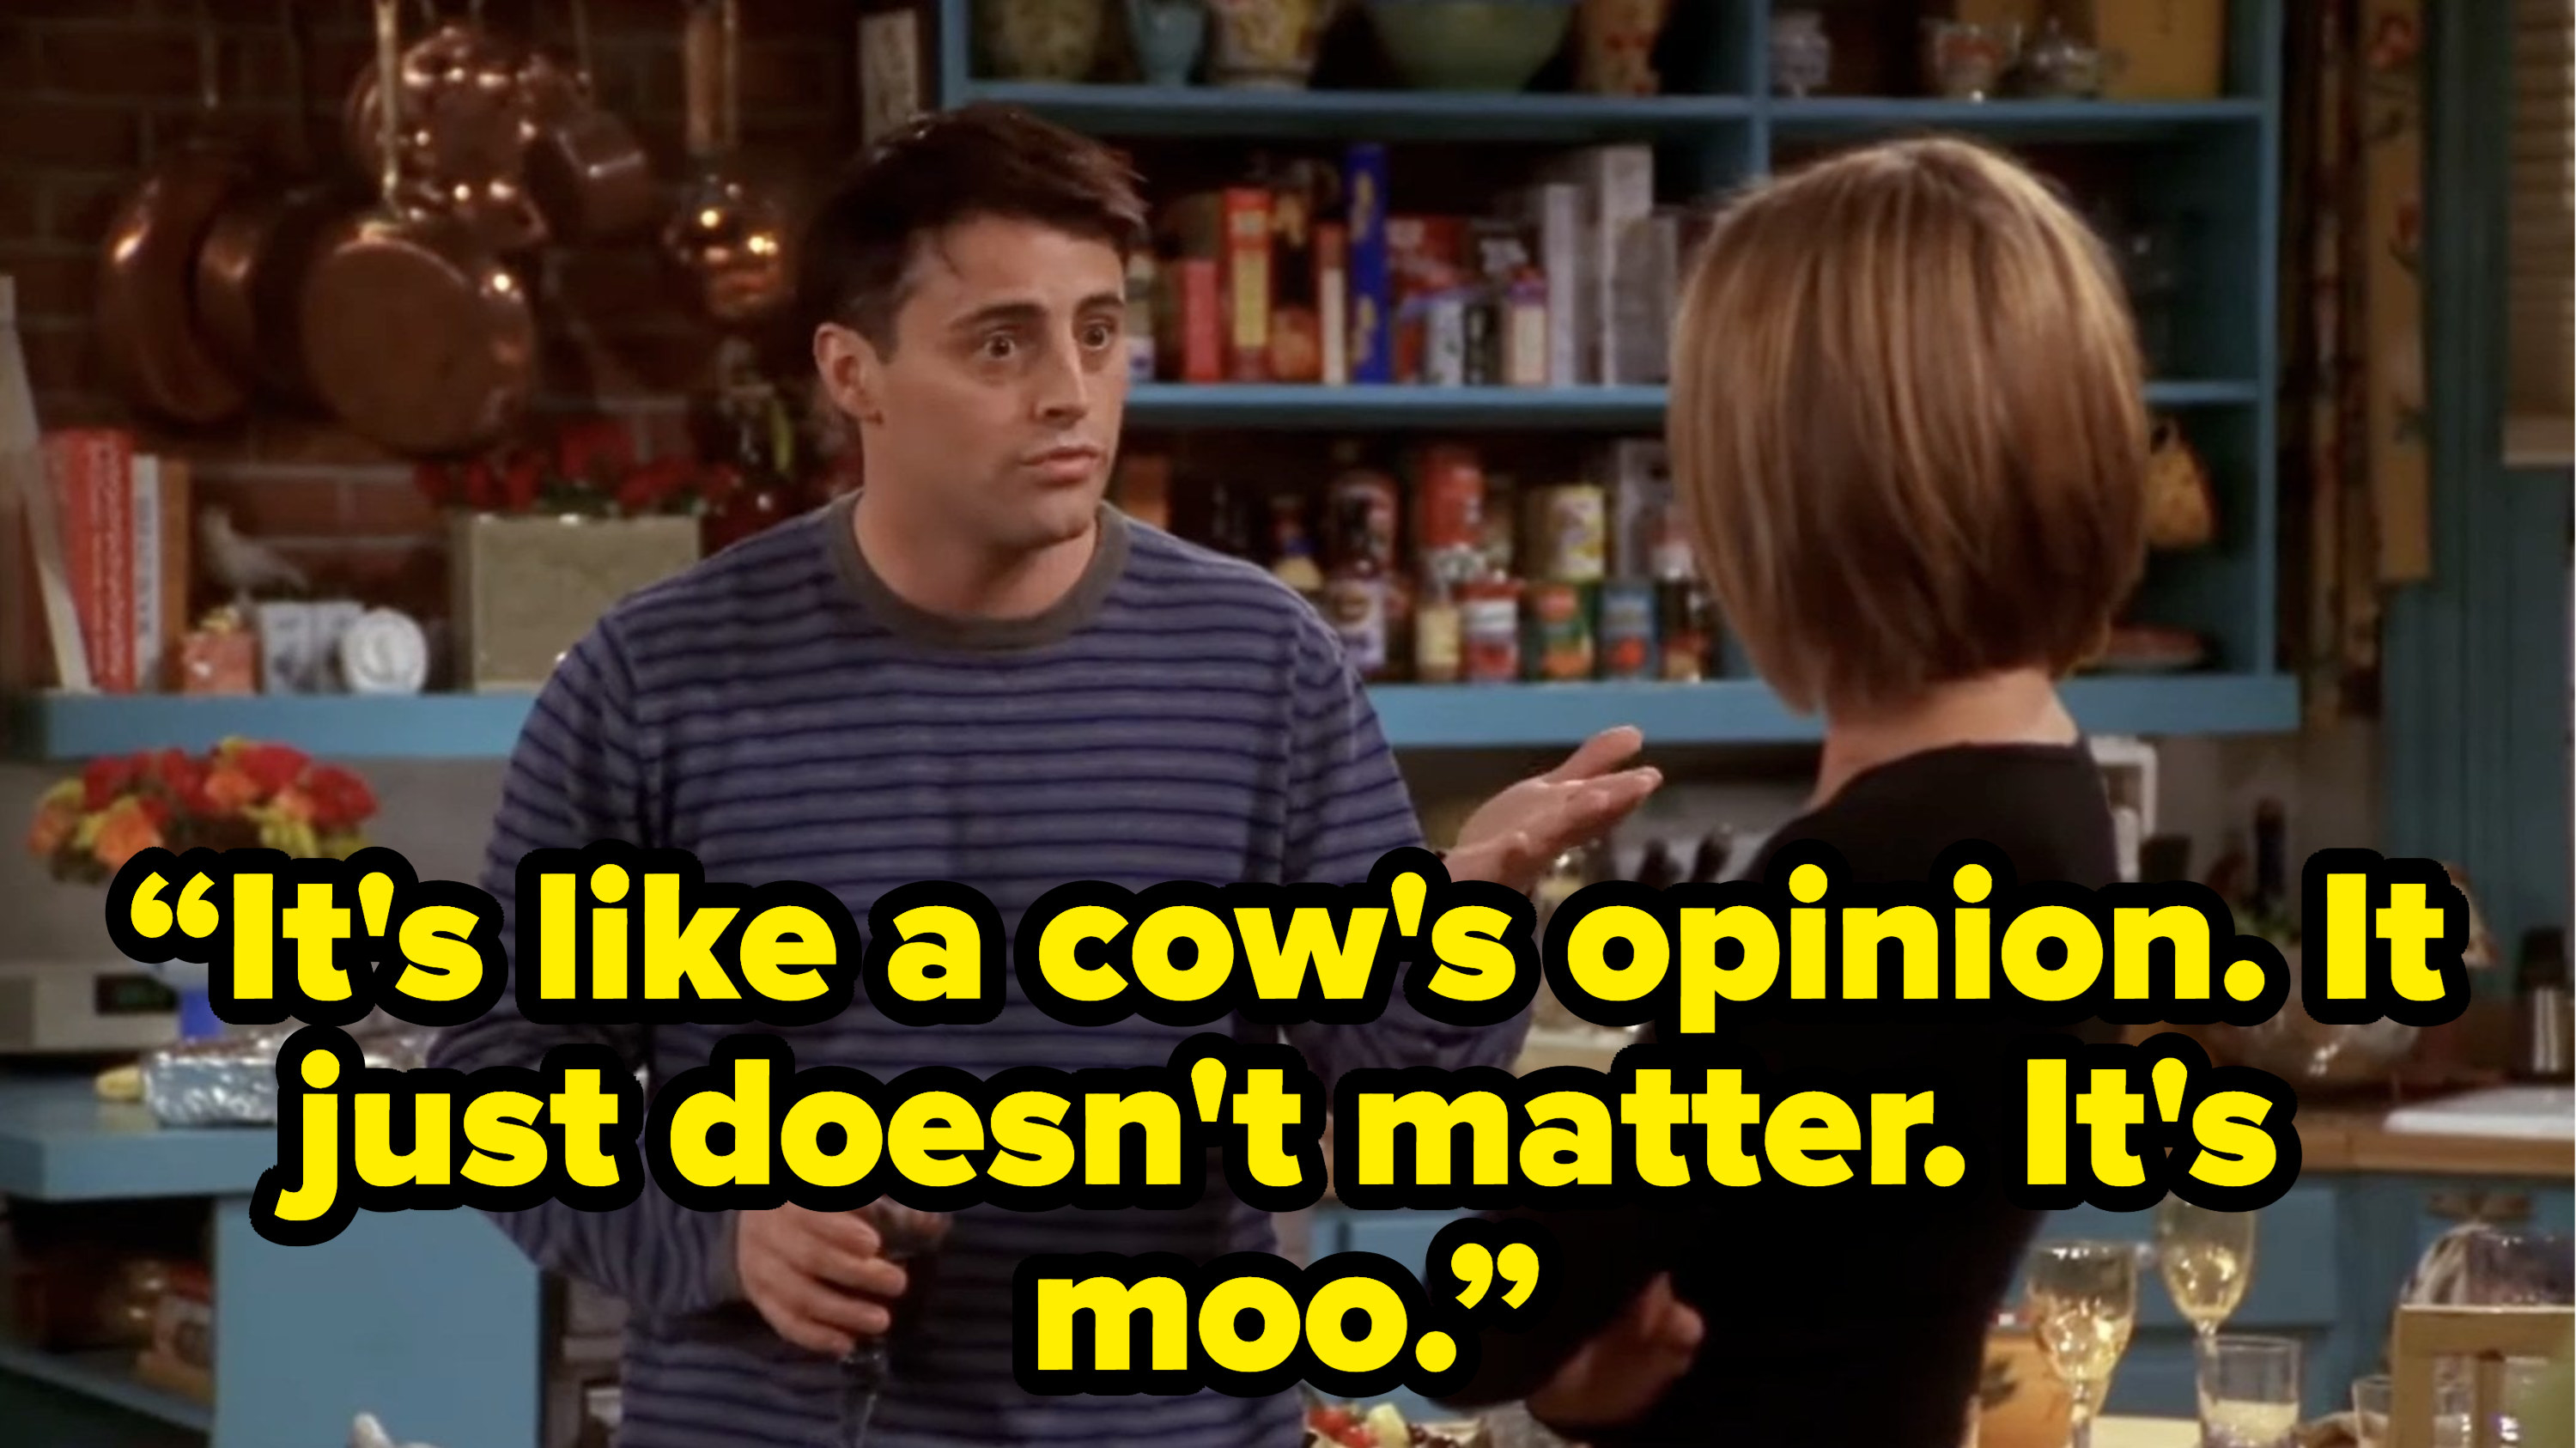 joey saying “It&#x27;s like a cow&#x27;s opinion. It just doesn&#x27;t matter. It&#x27;s moo.” on friends